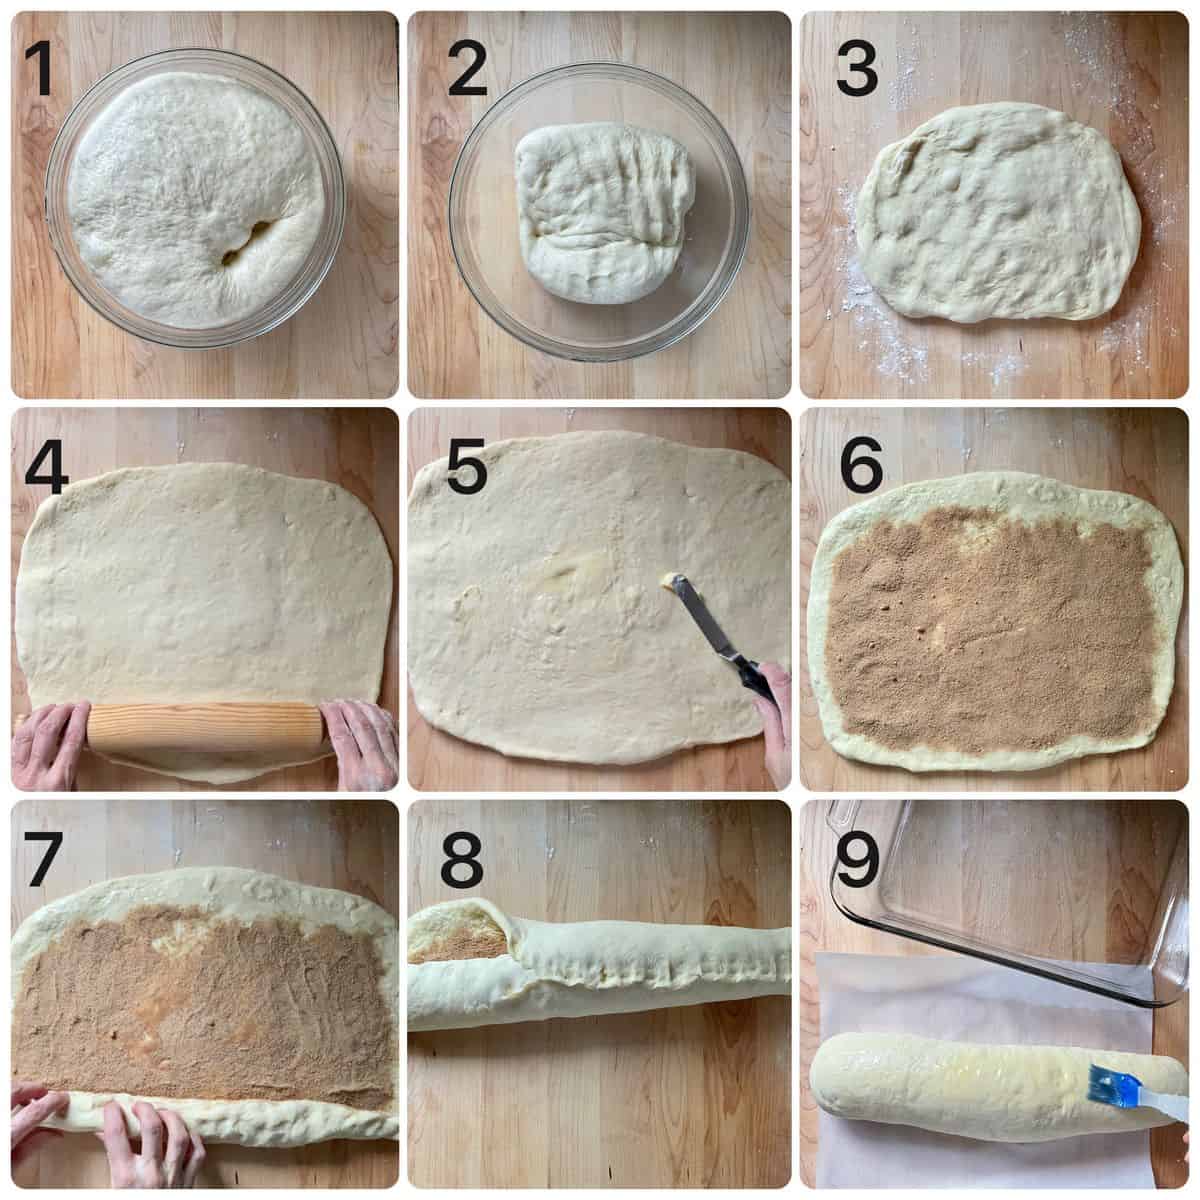 Step by step process of rolling cinnamon rolls.